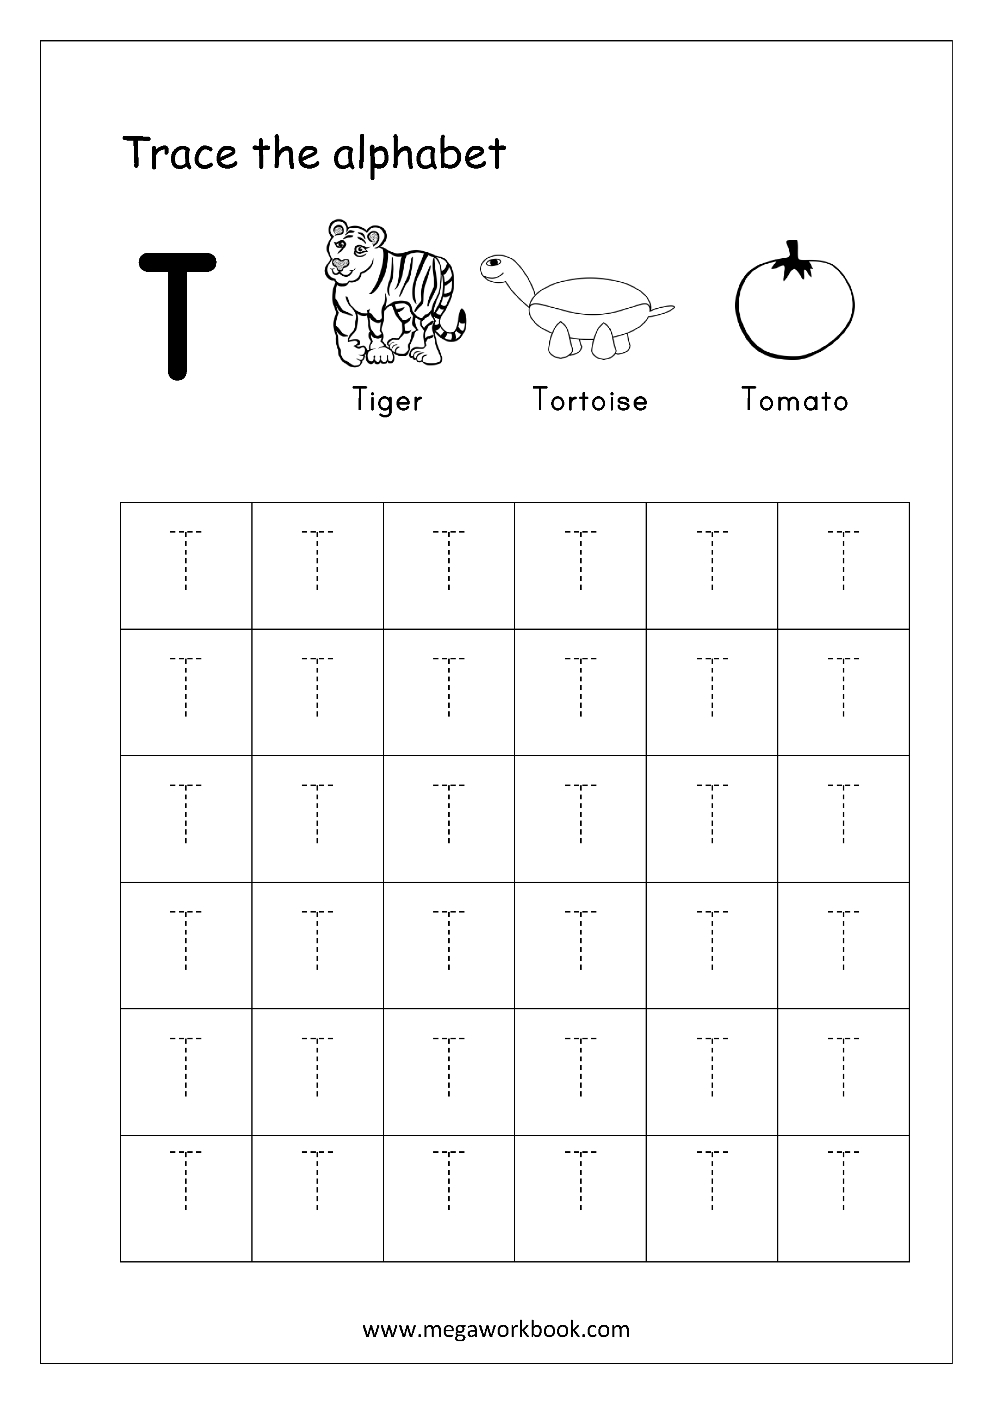 Tracing Letters - Letter Tracing Worksheets - Capital intended for Alphabet Tracing Capital Letters